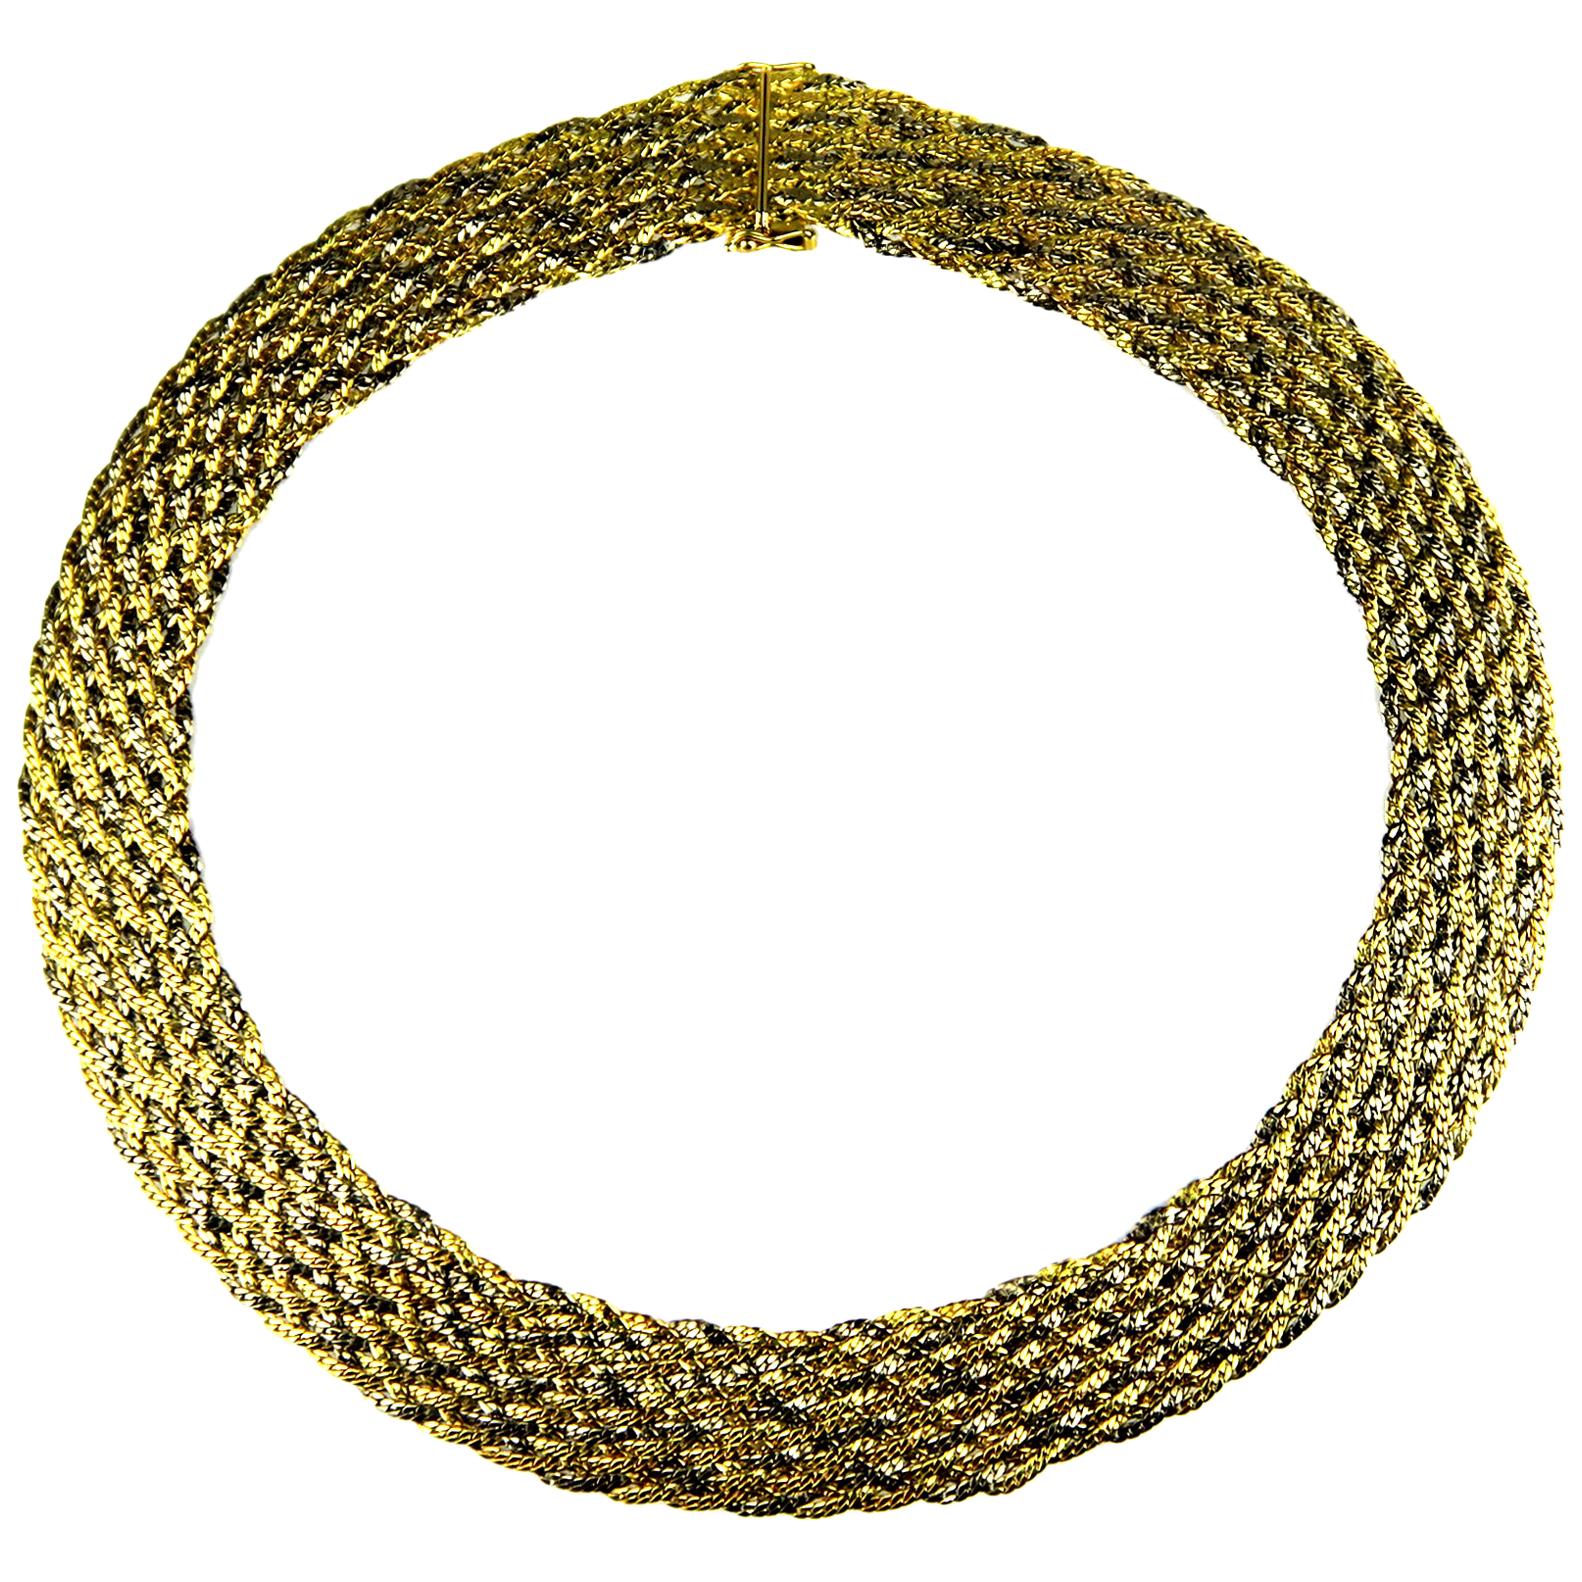 Vintage, Retro, Wide Flat Weave Necklace with Yellow, White, Rose Gold in 18K For Sale